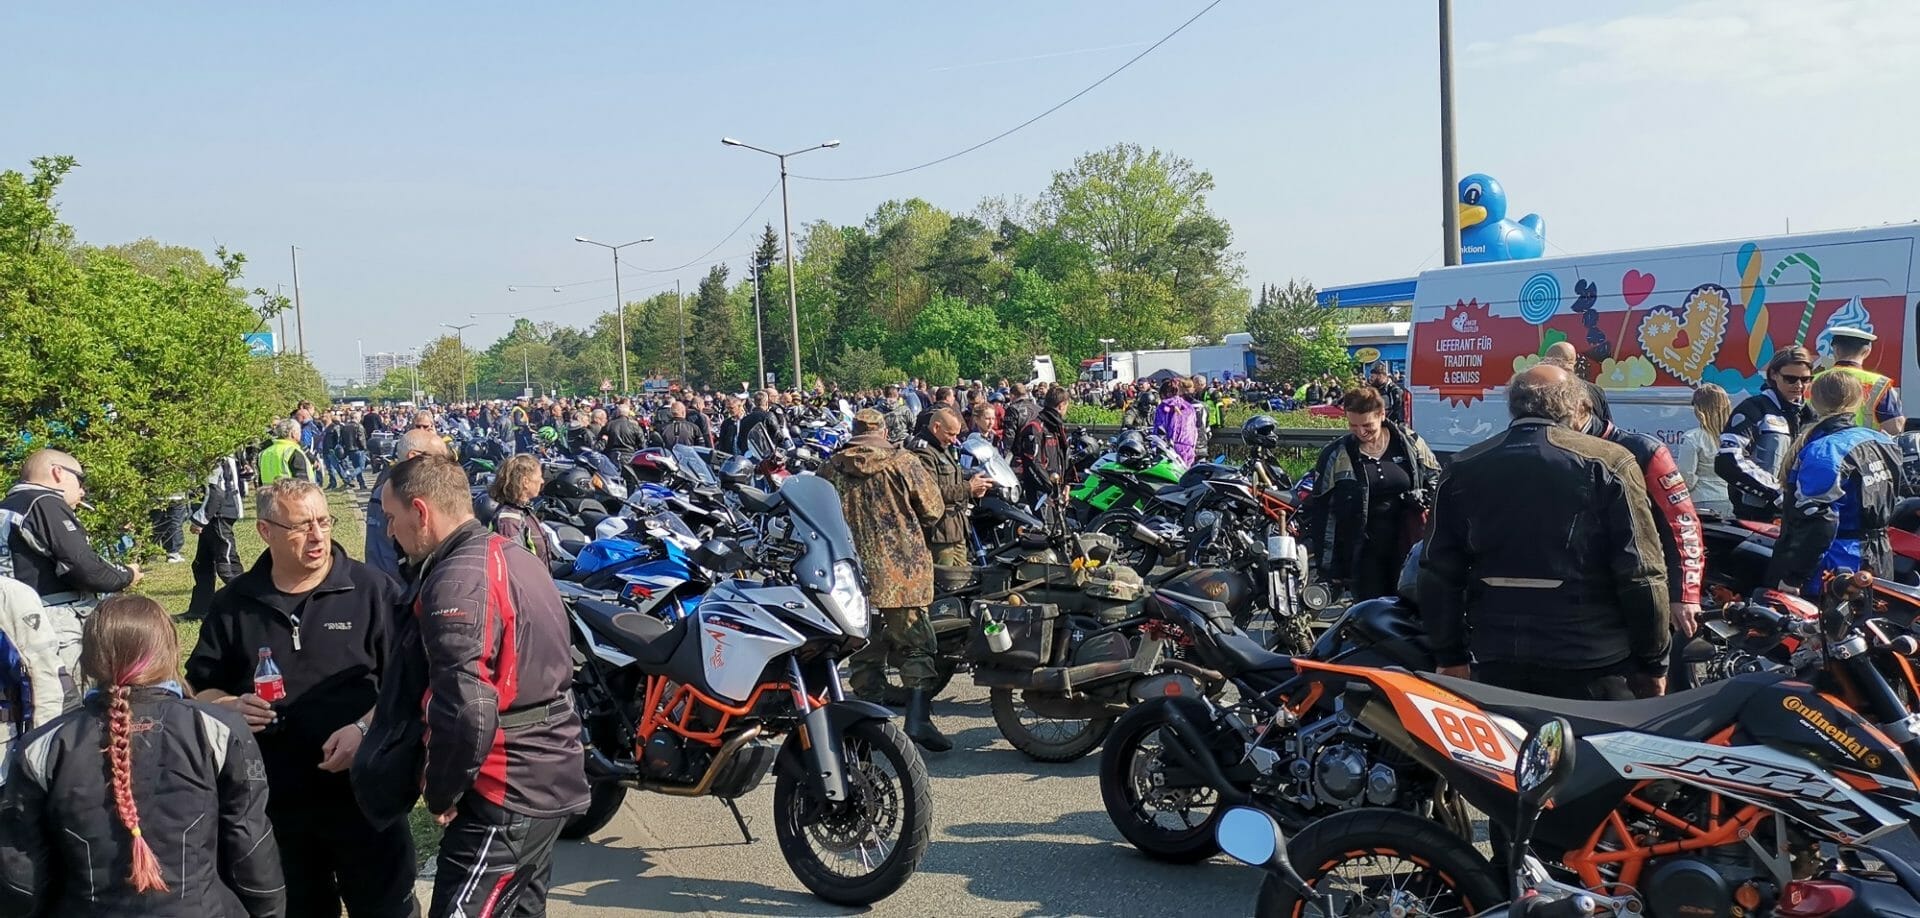 More than 13,000 bikers at the May 1 meeting in Nuremberg - MOTORCYCLES.NEWS